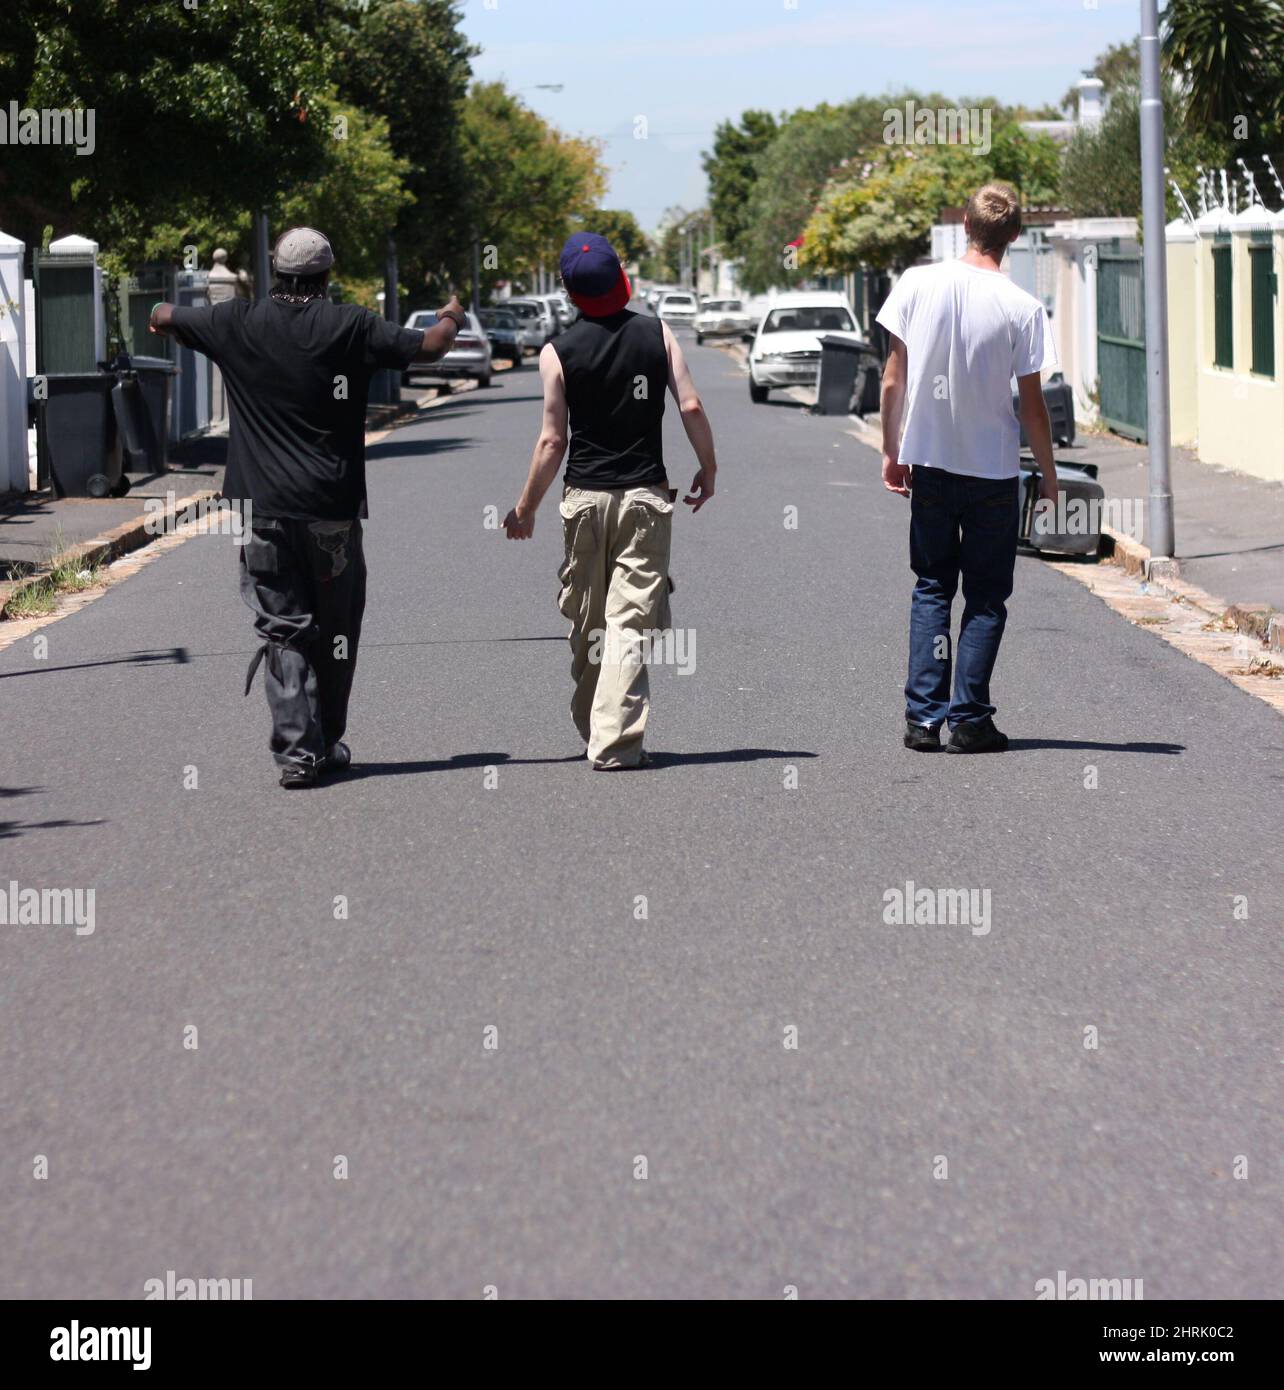 We run these streets. Shot of three young men walking down a suburban street. Stock Photo